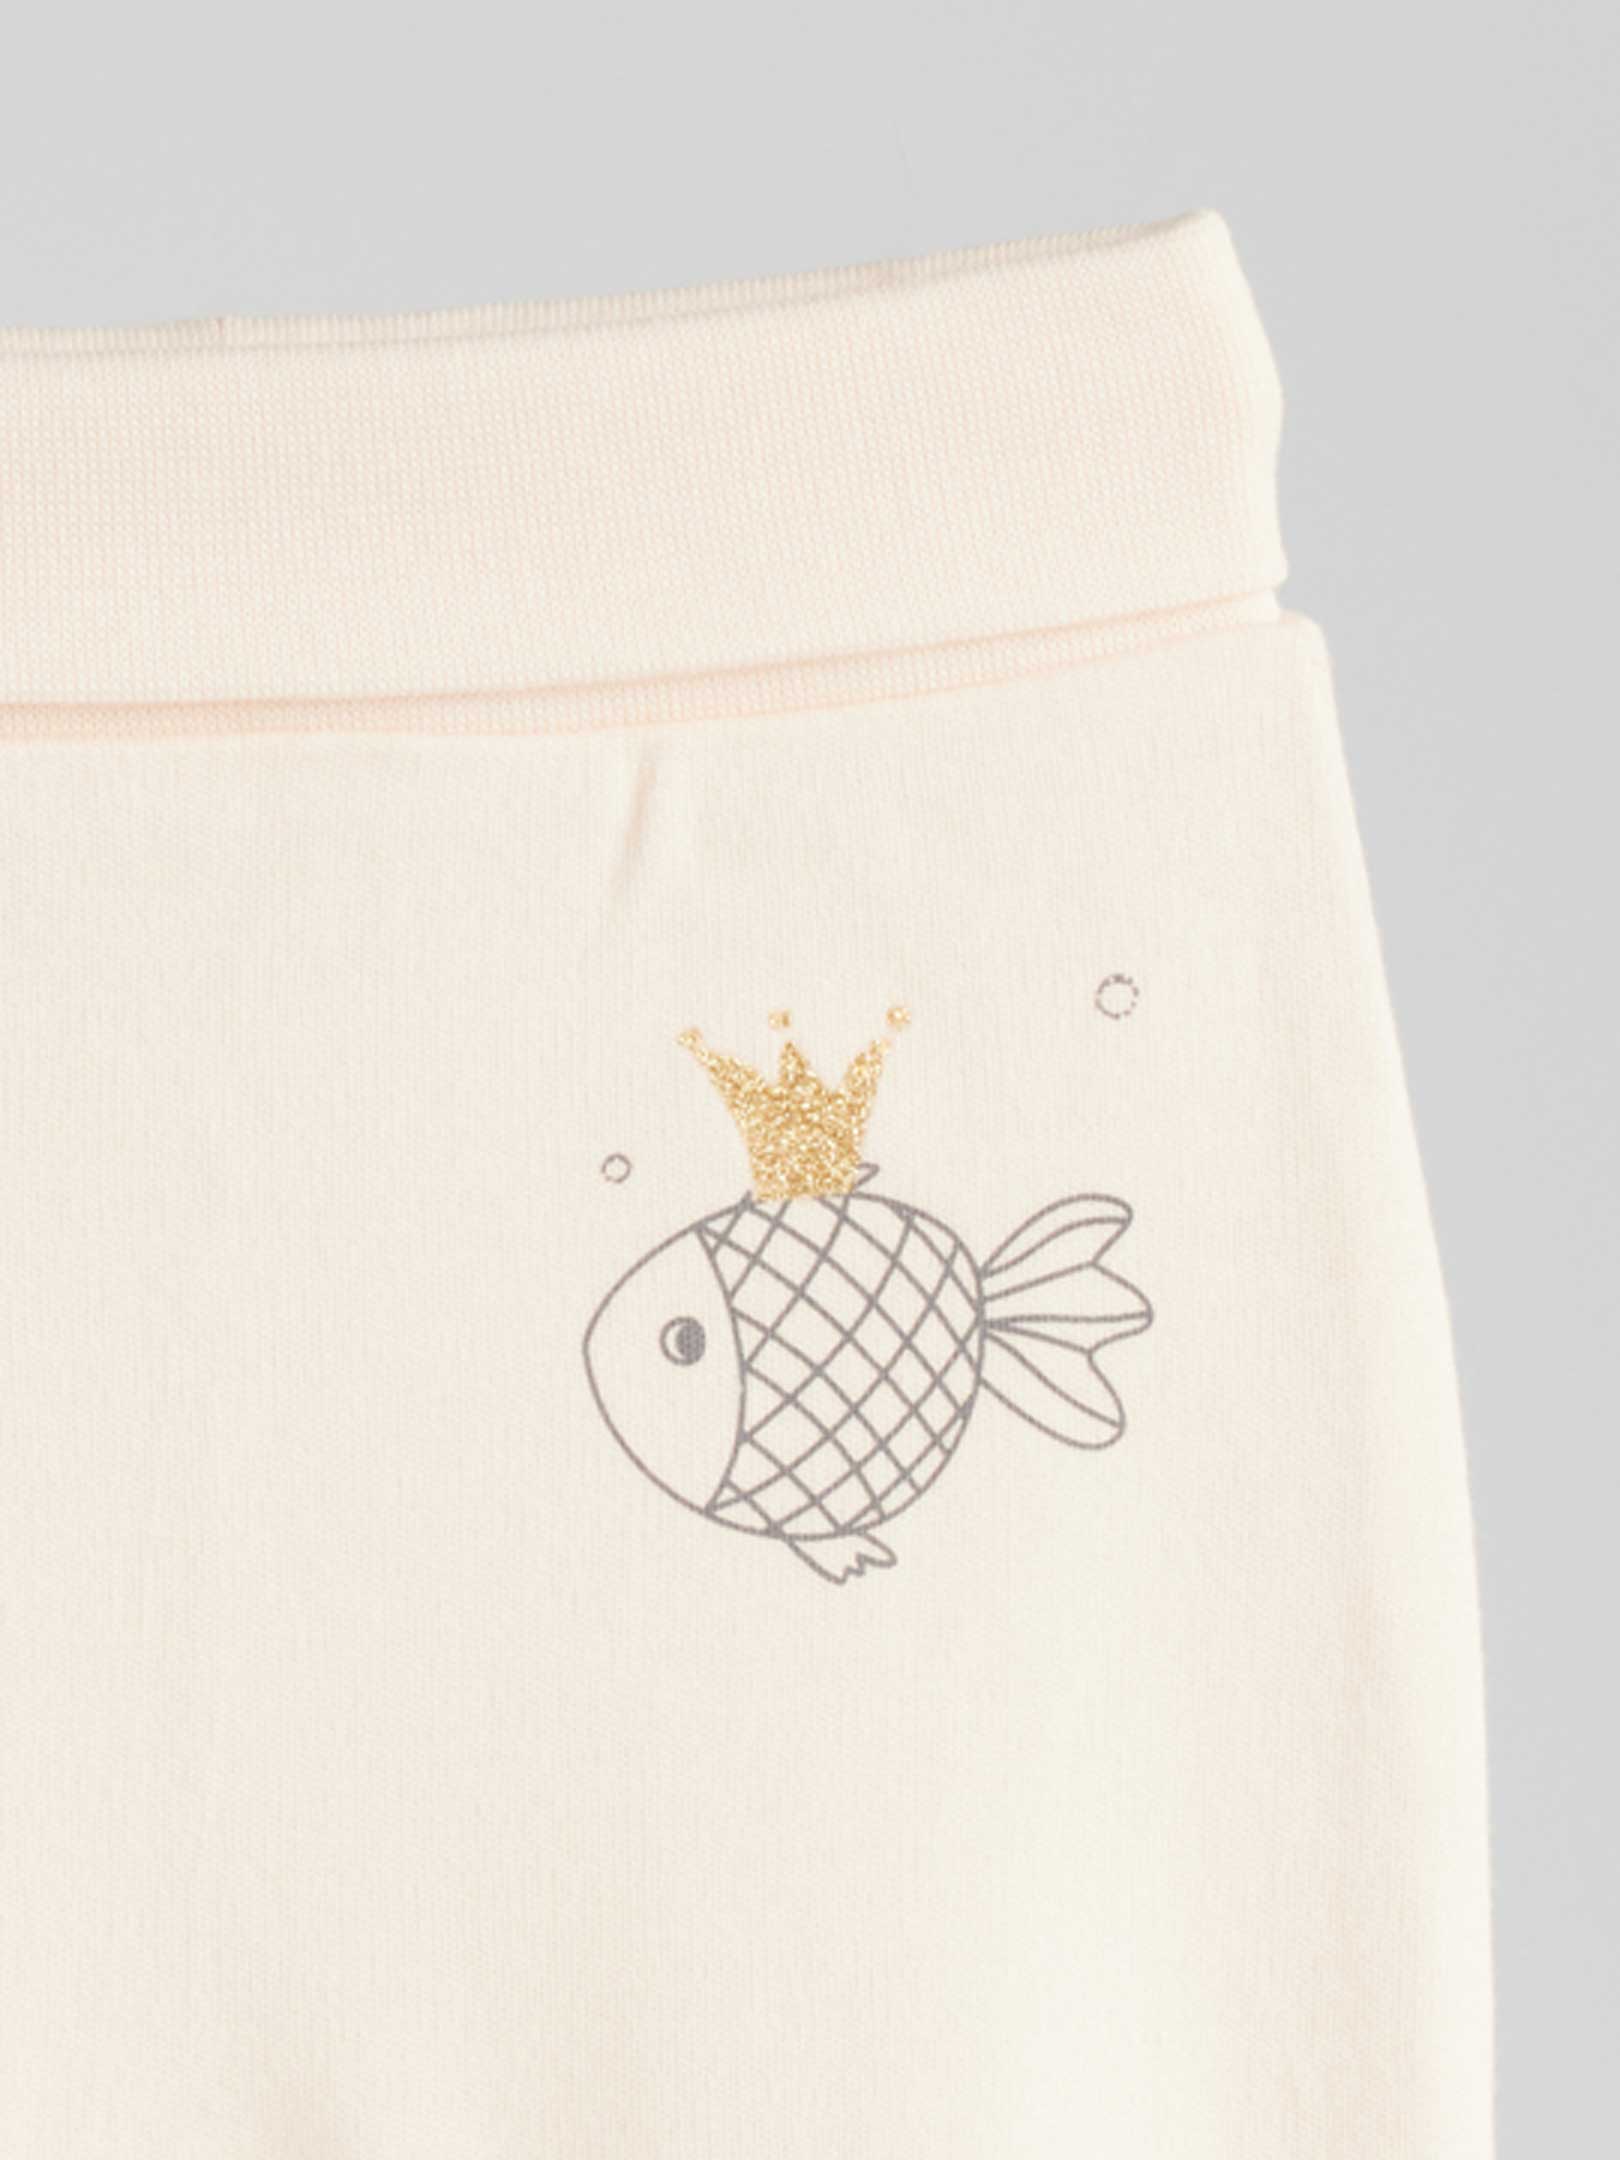 Infant pants Godl Fish 305 have a fish wearing a golden crown on the left side, making it both cozy and cute